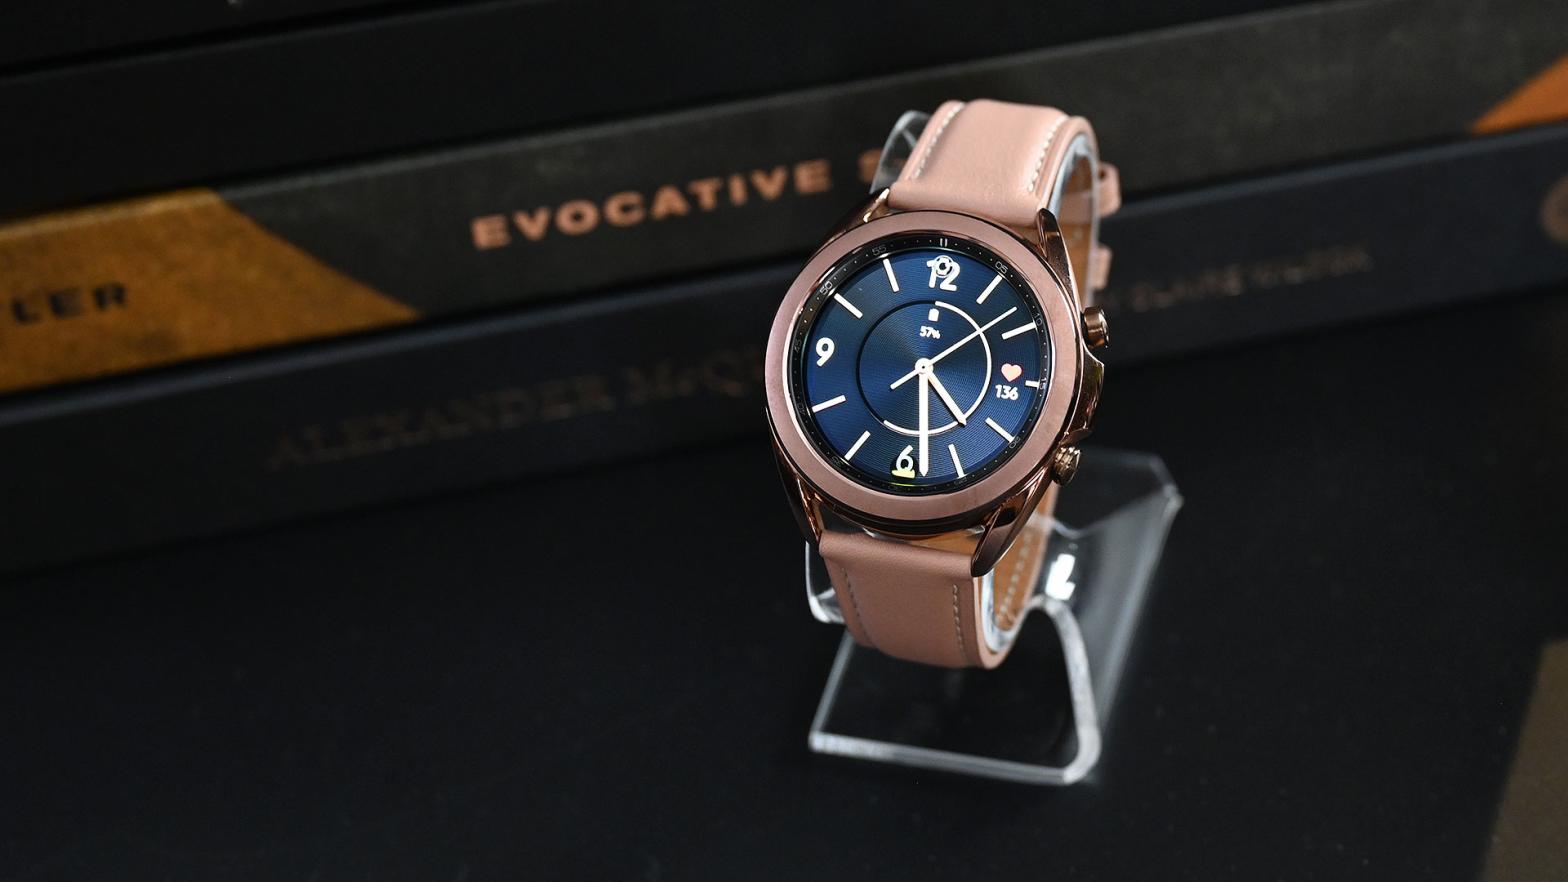 The 41mm Galaxy Watch 3 in Mystic Bronze.  (Photo: Sam Rutherford/Gizmodo)